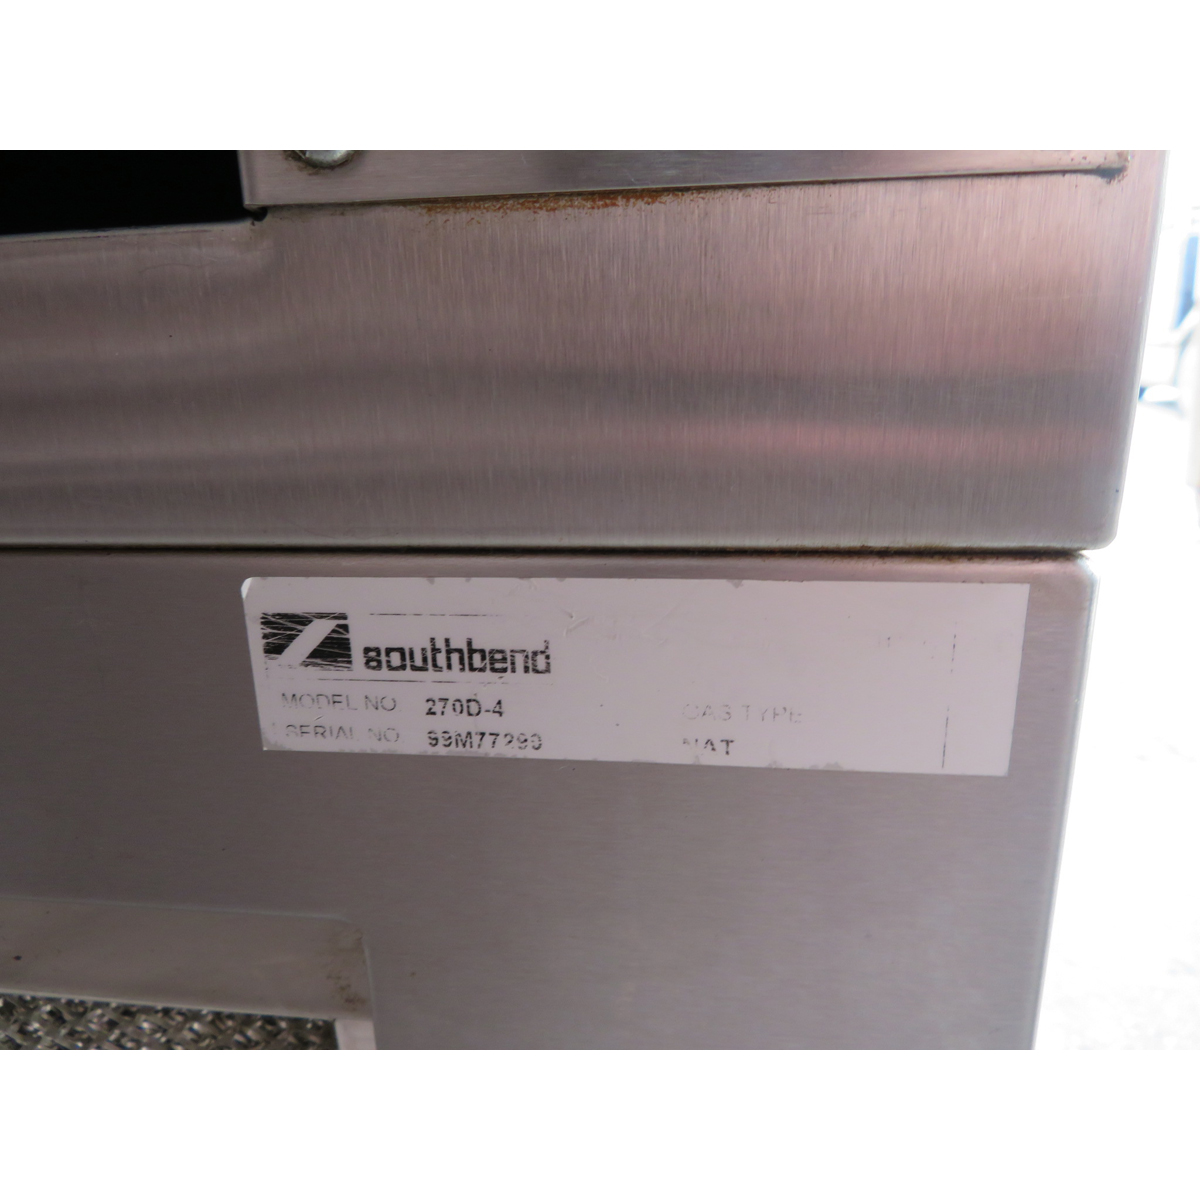 Southbend 270D-4 Two Deck Infrared Broiler, Used Excellent Condition image 4